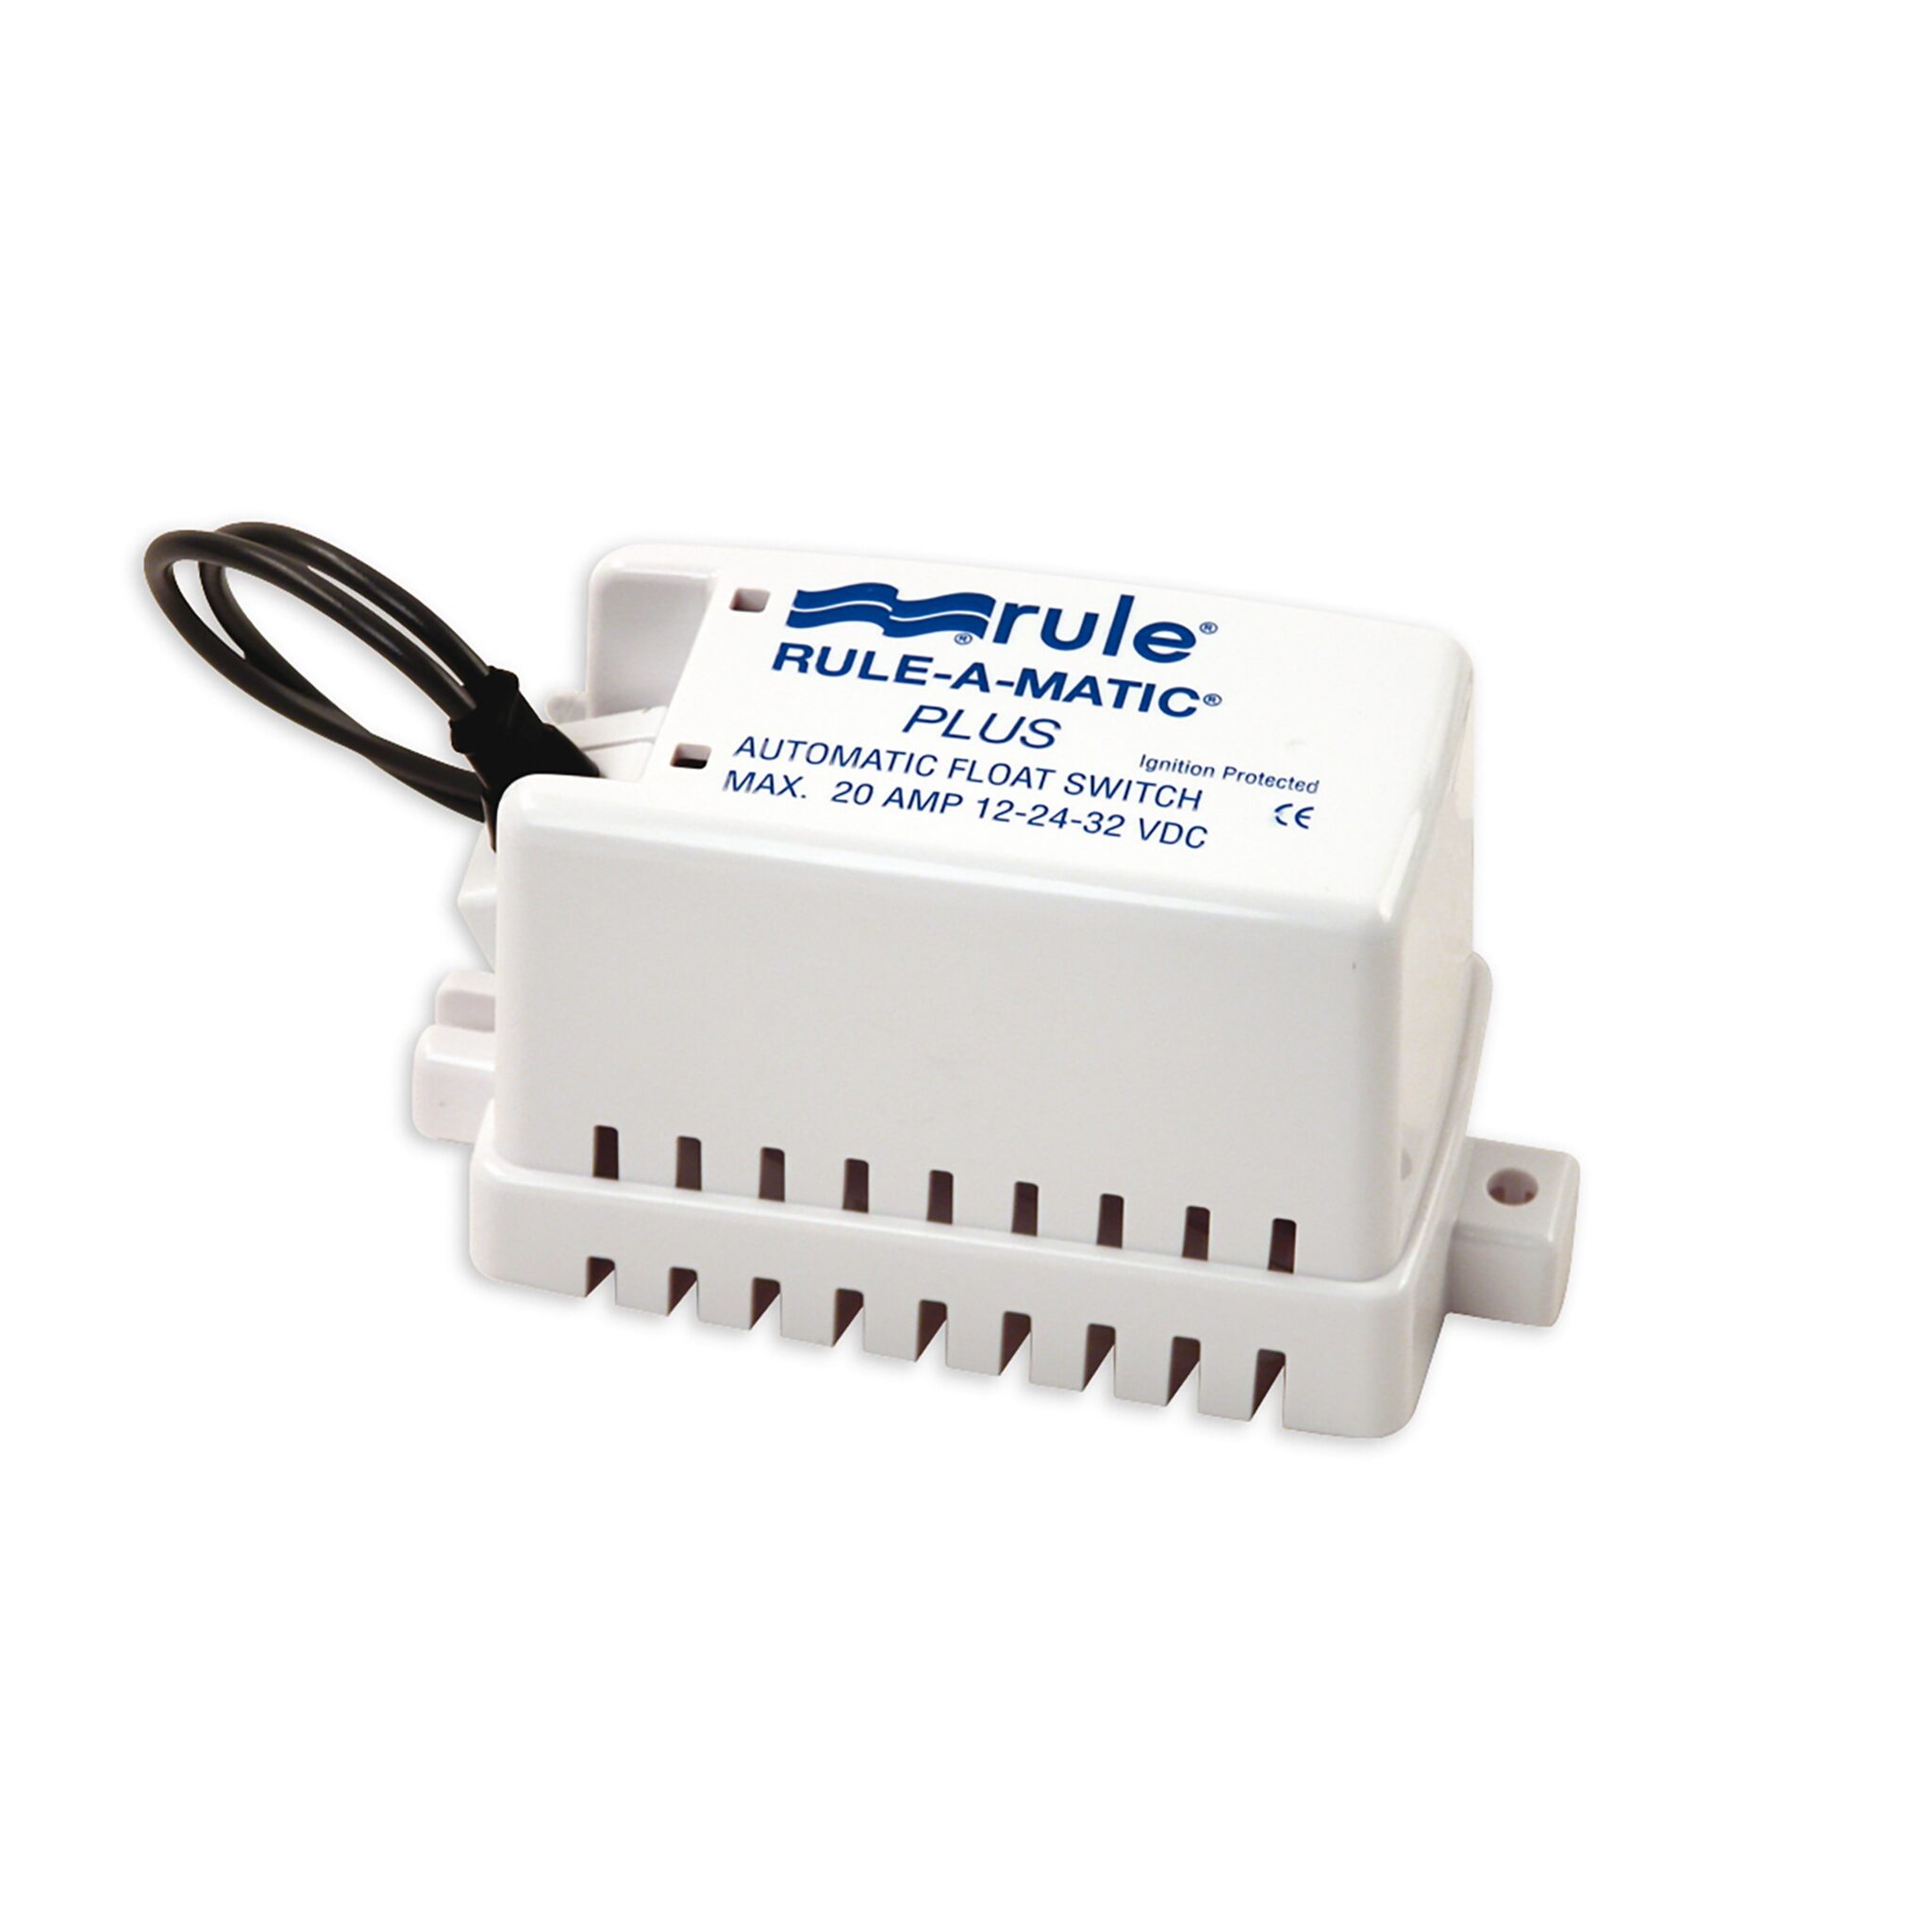 RULE-A-MATIC Plus float switch